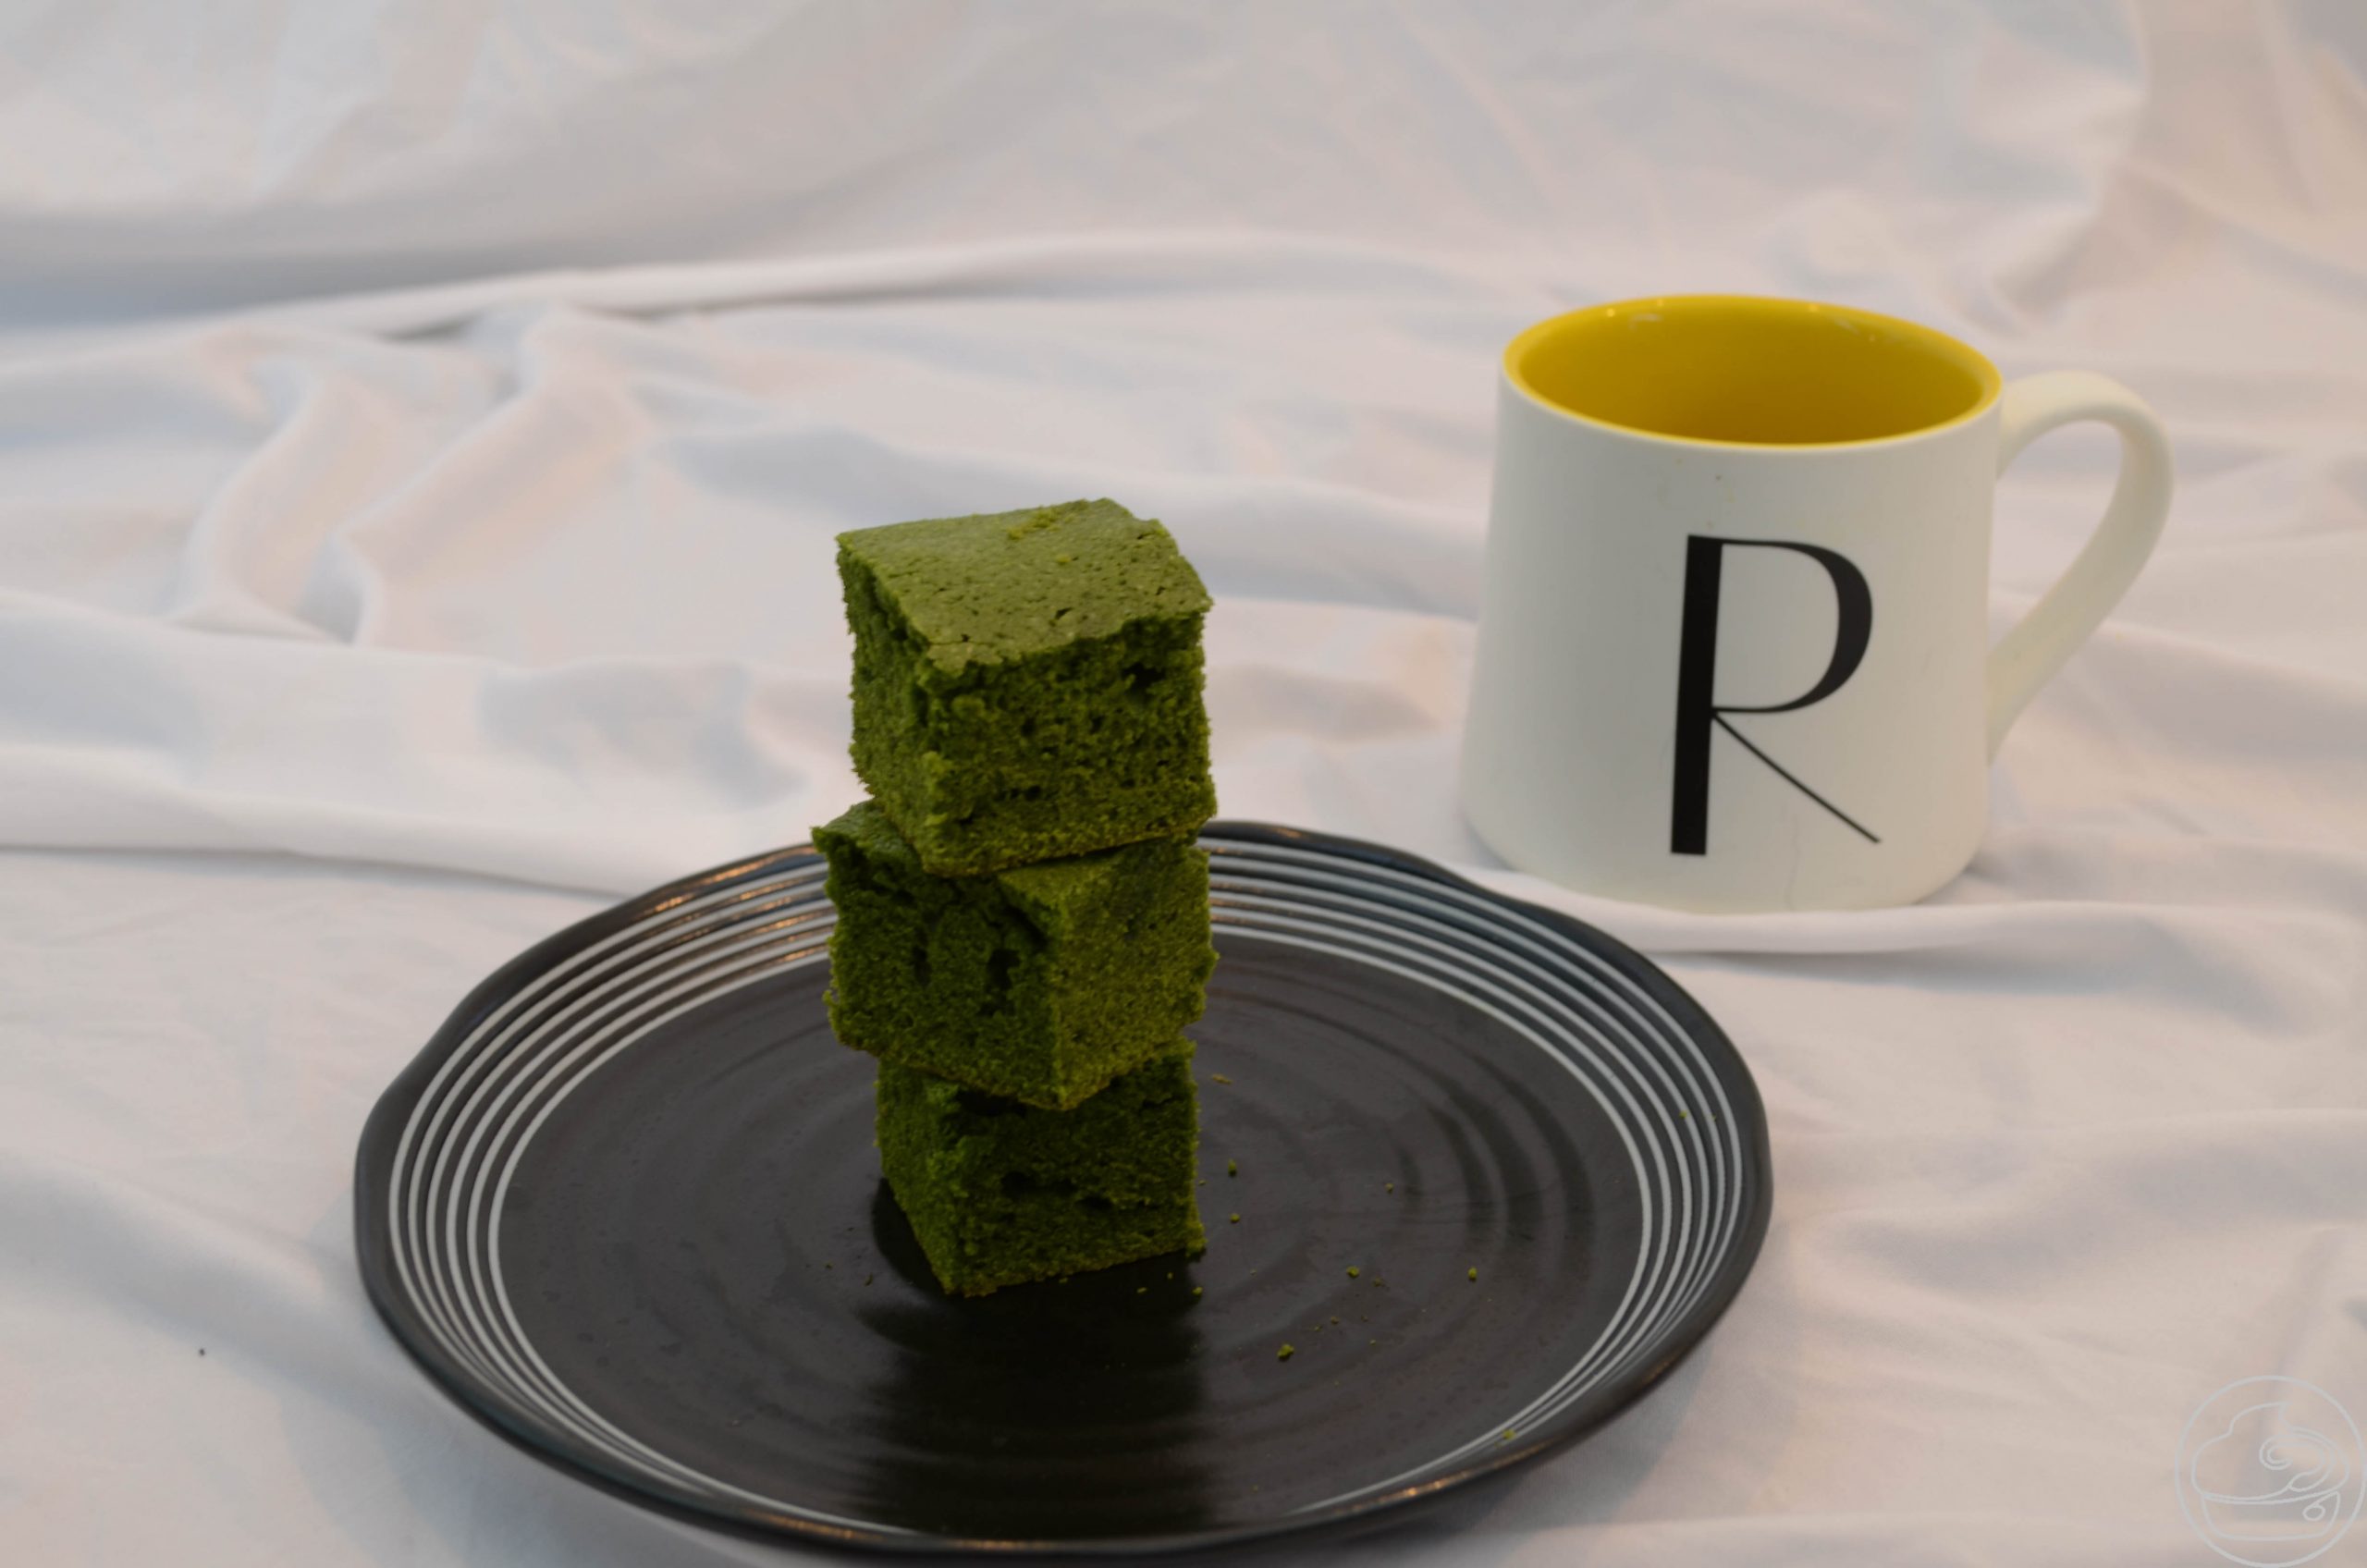 Matcha Bites stacked on a black plate on a white tablecloth with a yellow and white cup